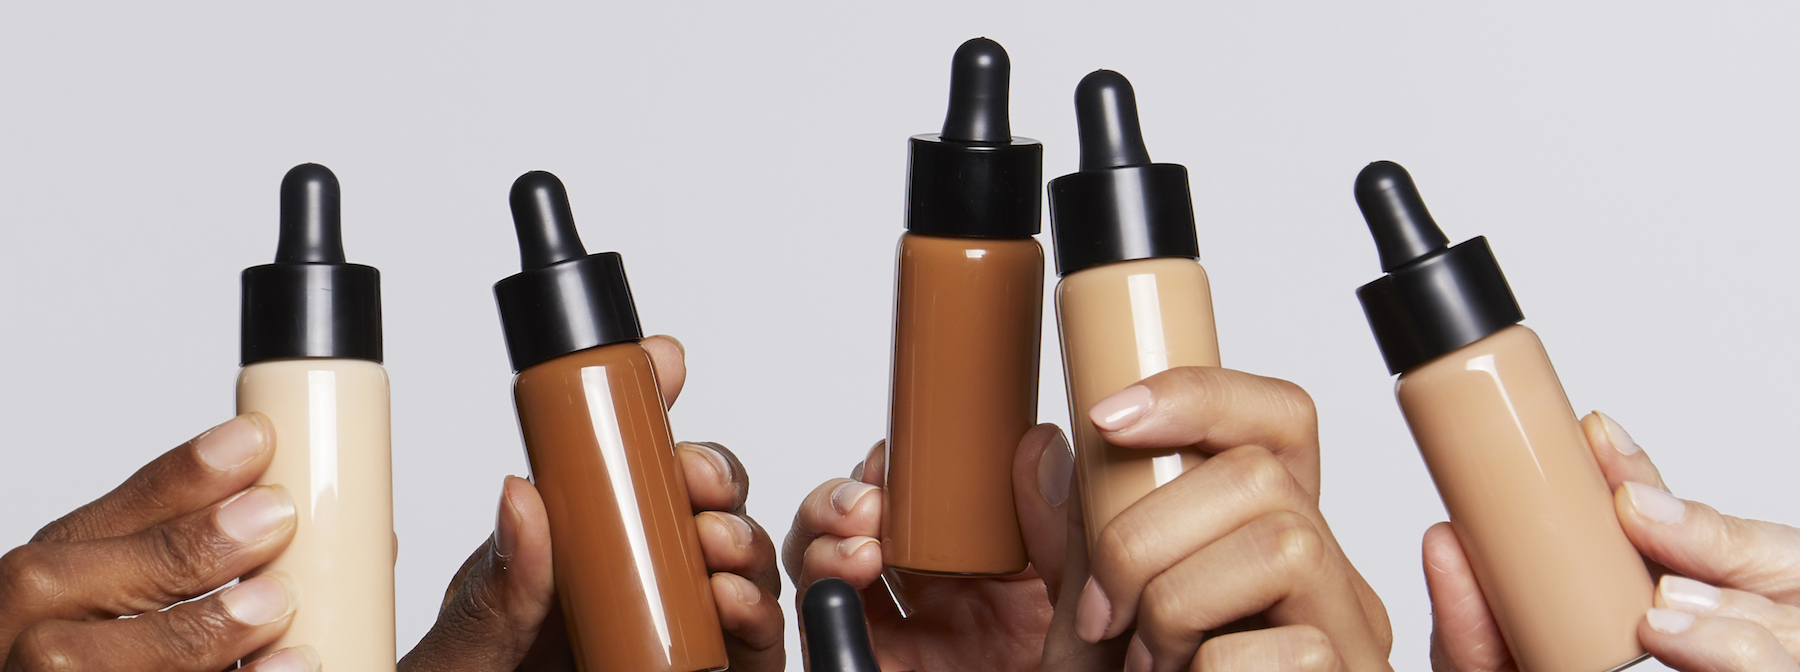 How to Find the Best Foundation Color Shade for You: 10 Steps